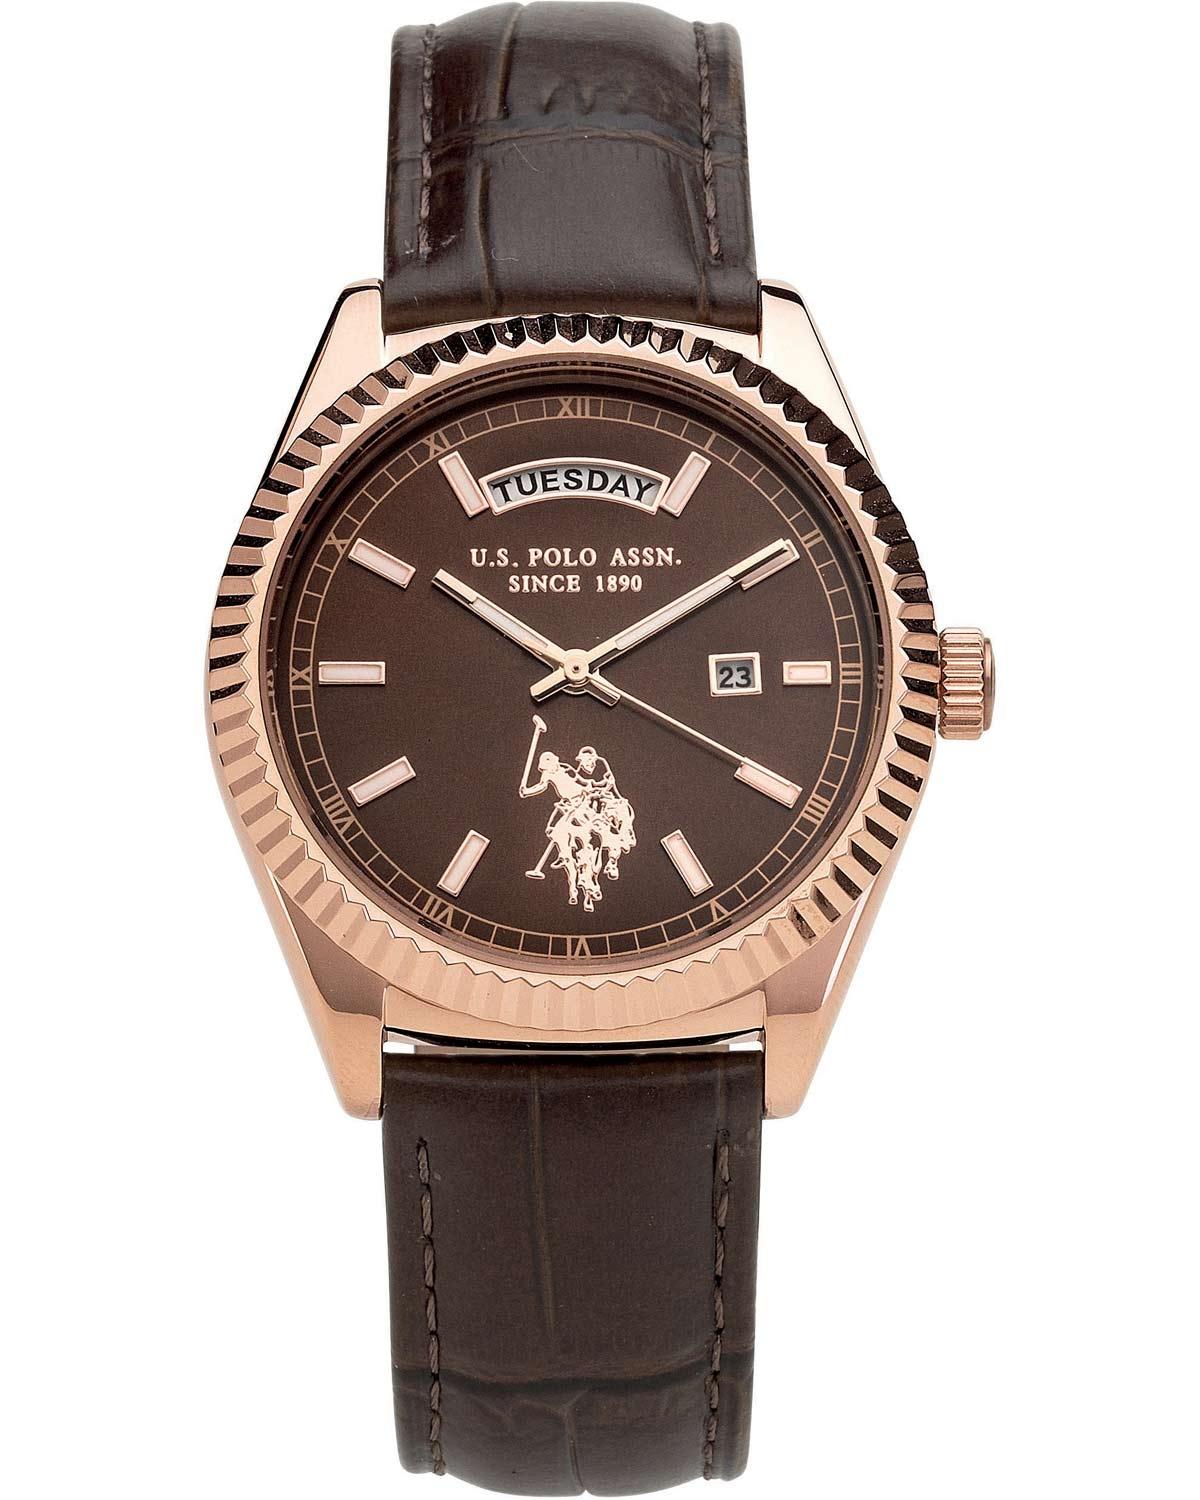 U.S. POLO Aram - USP3111BR, Rose Gold case with Brown Leather Strap